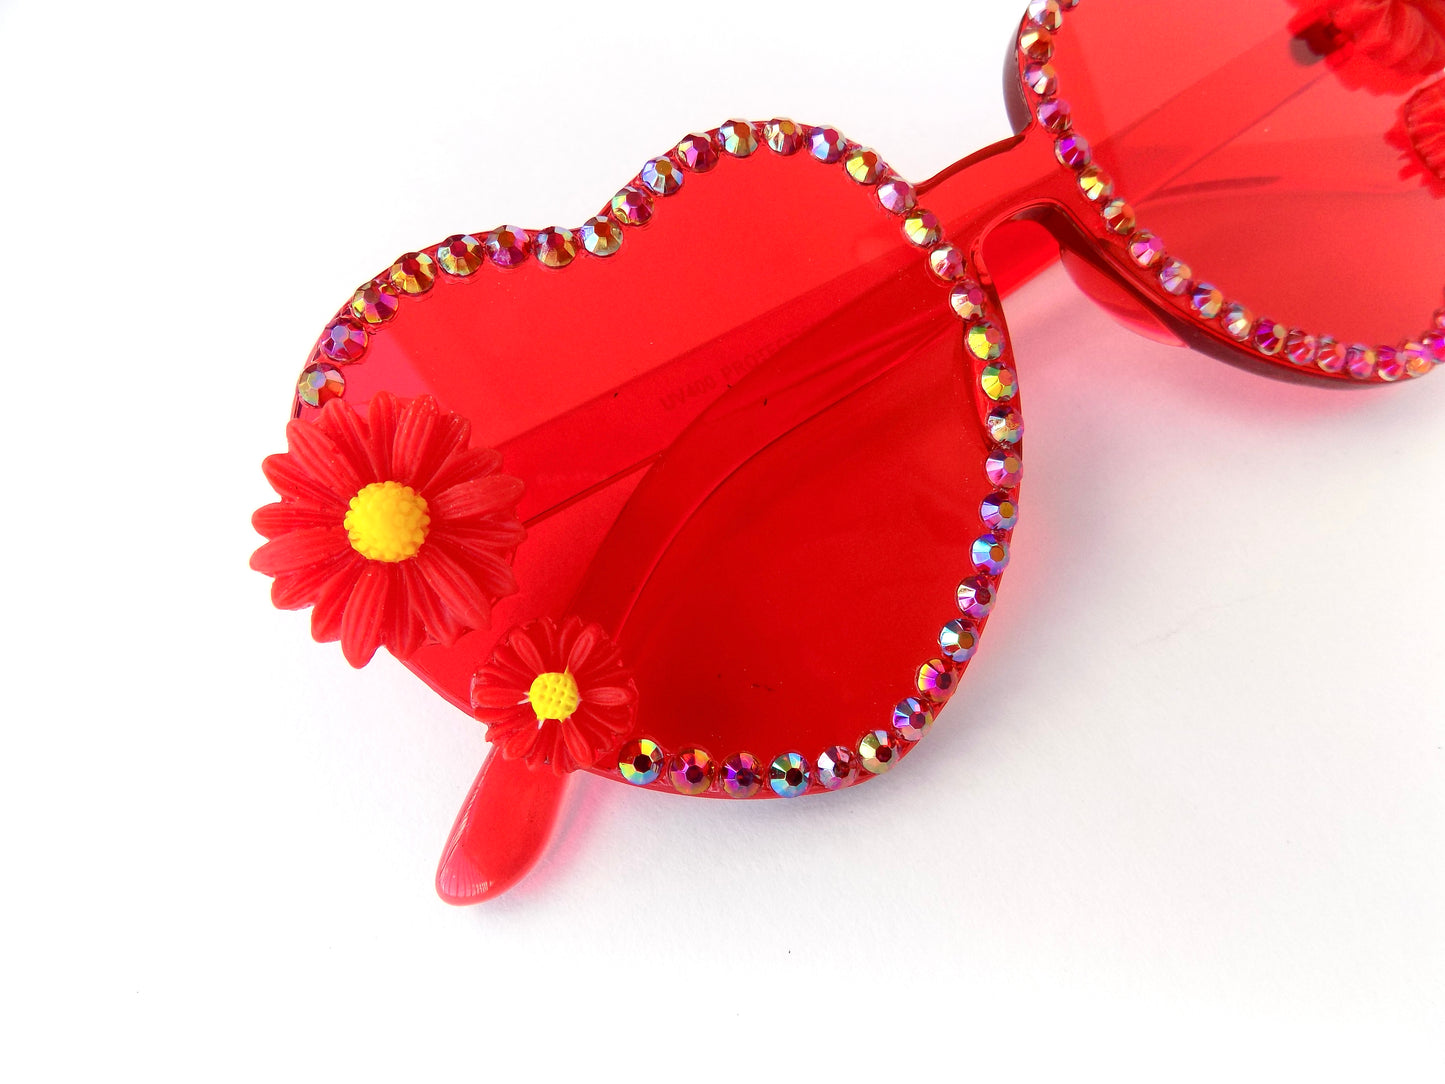 Billy Strings RED DAISY heart-shaped glasses